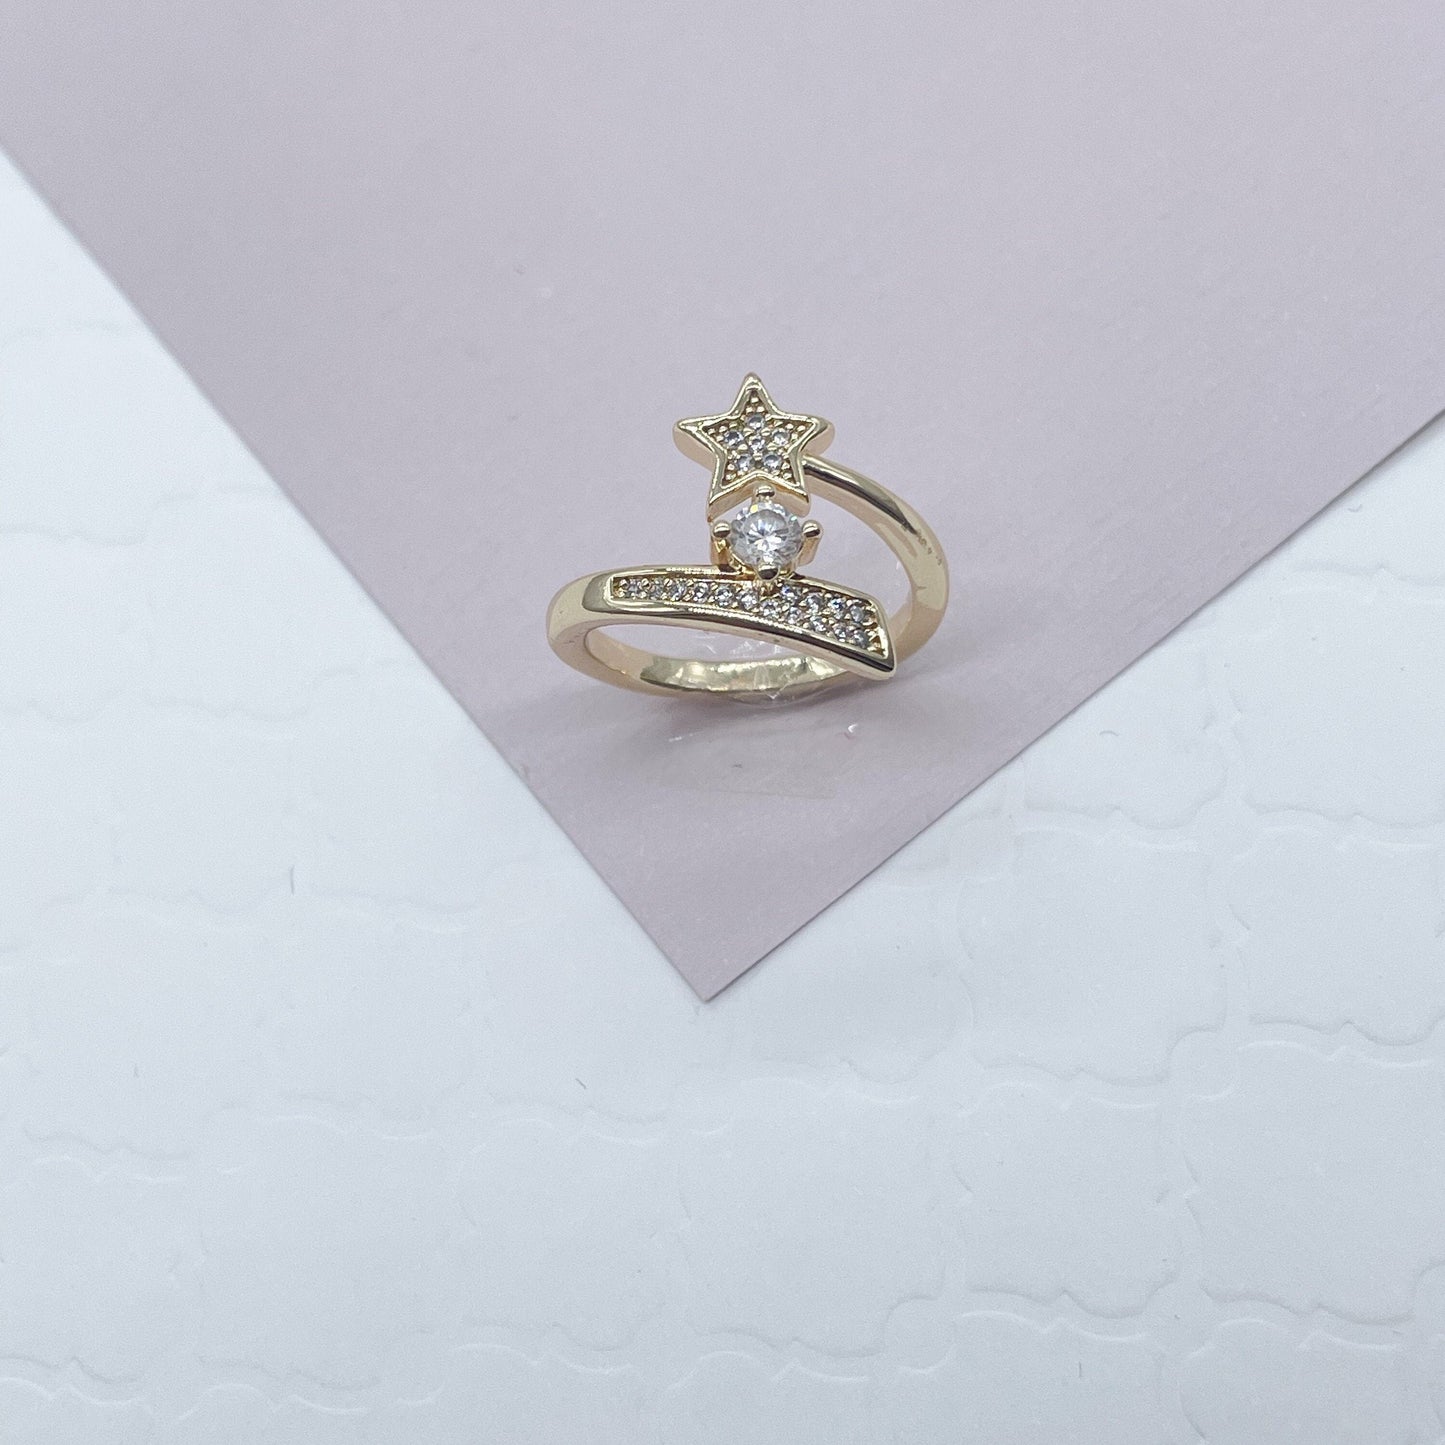 18k Gold Filled “Shooting Star” Ring Featuring Micro Pave Cubic Zirconia and A Solitaire   Dainty Jewelry